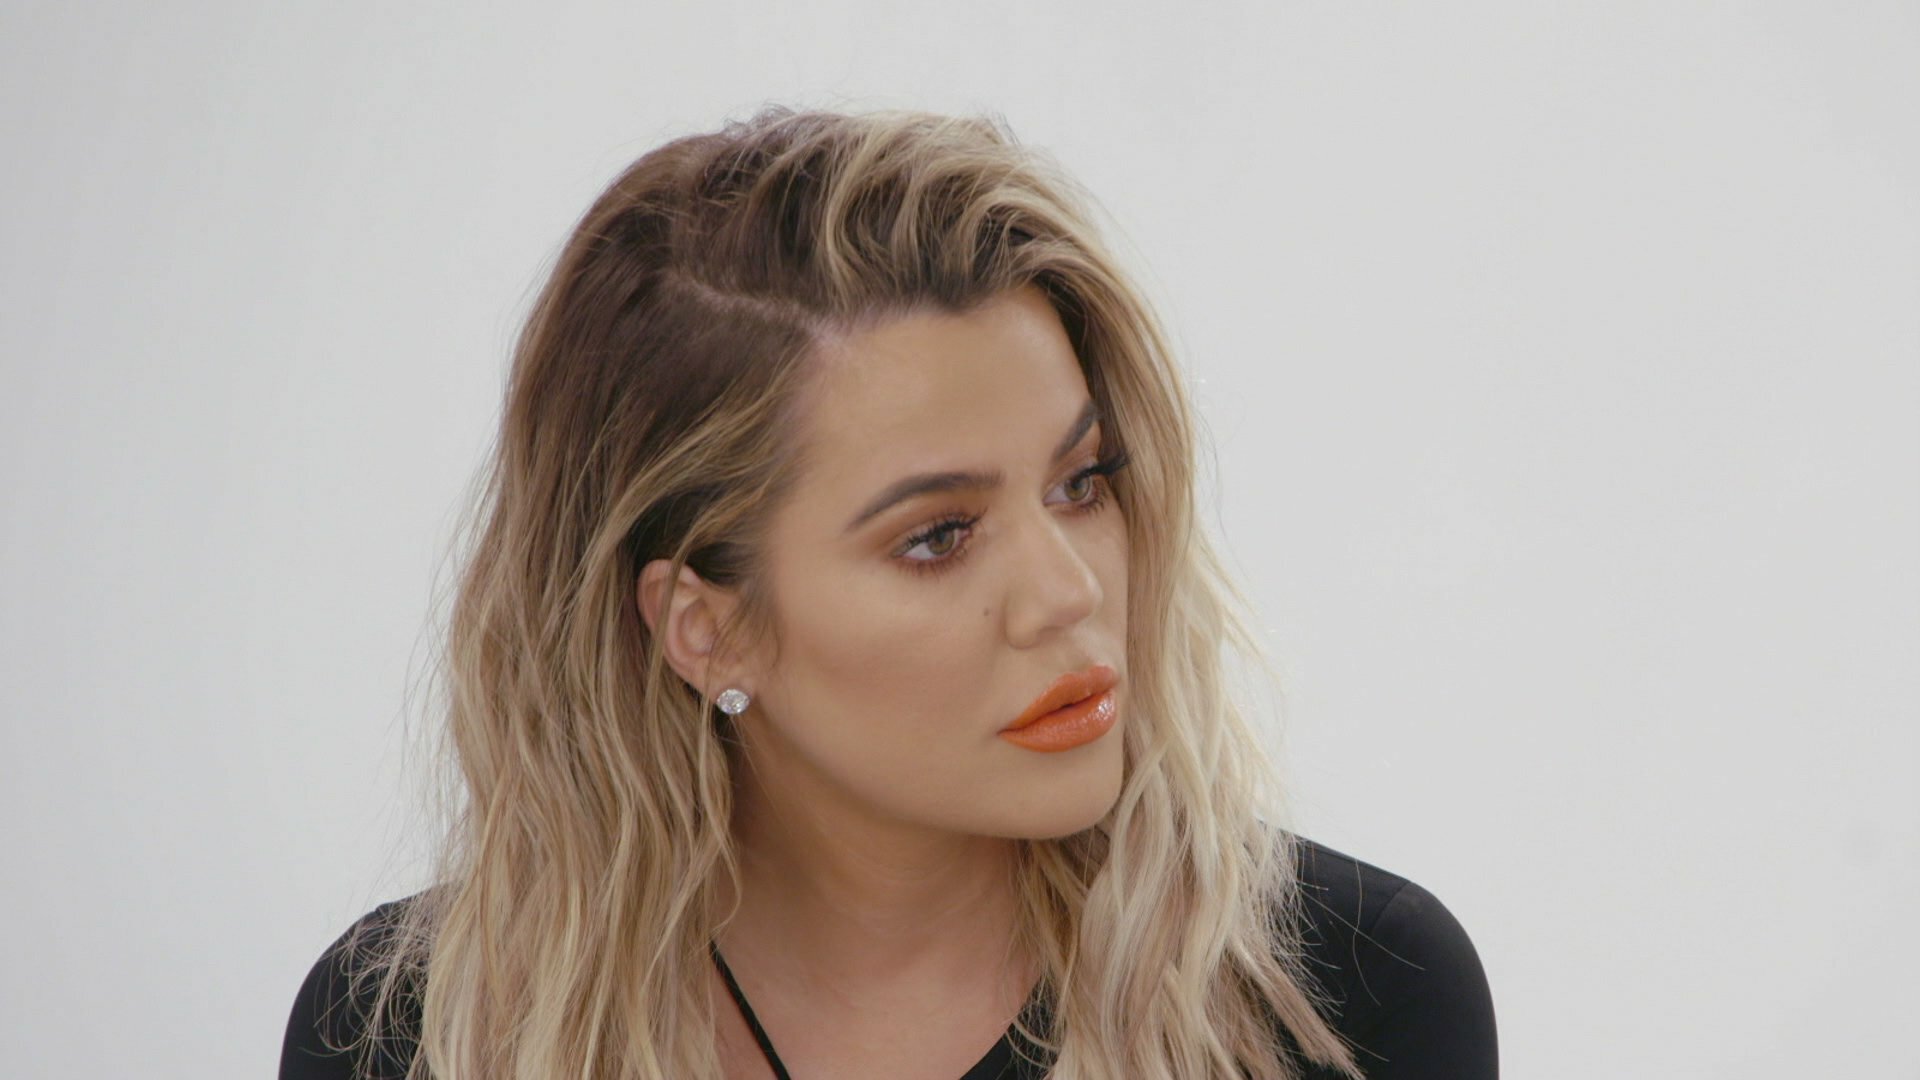 Revenge Body with Khloé Kardashian S2E6 Eye of the Tiger & The Other Woman